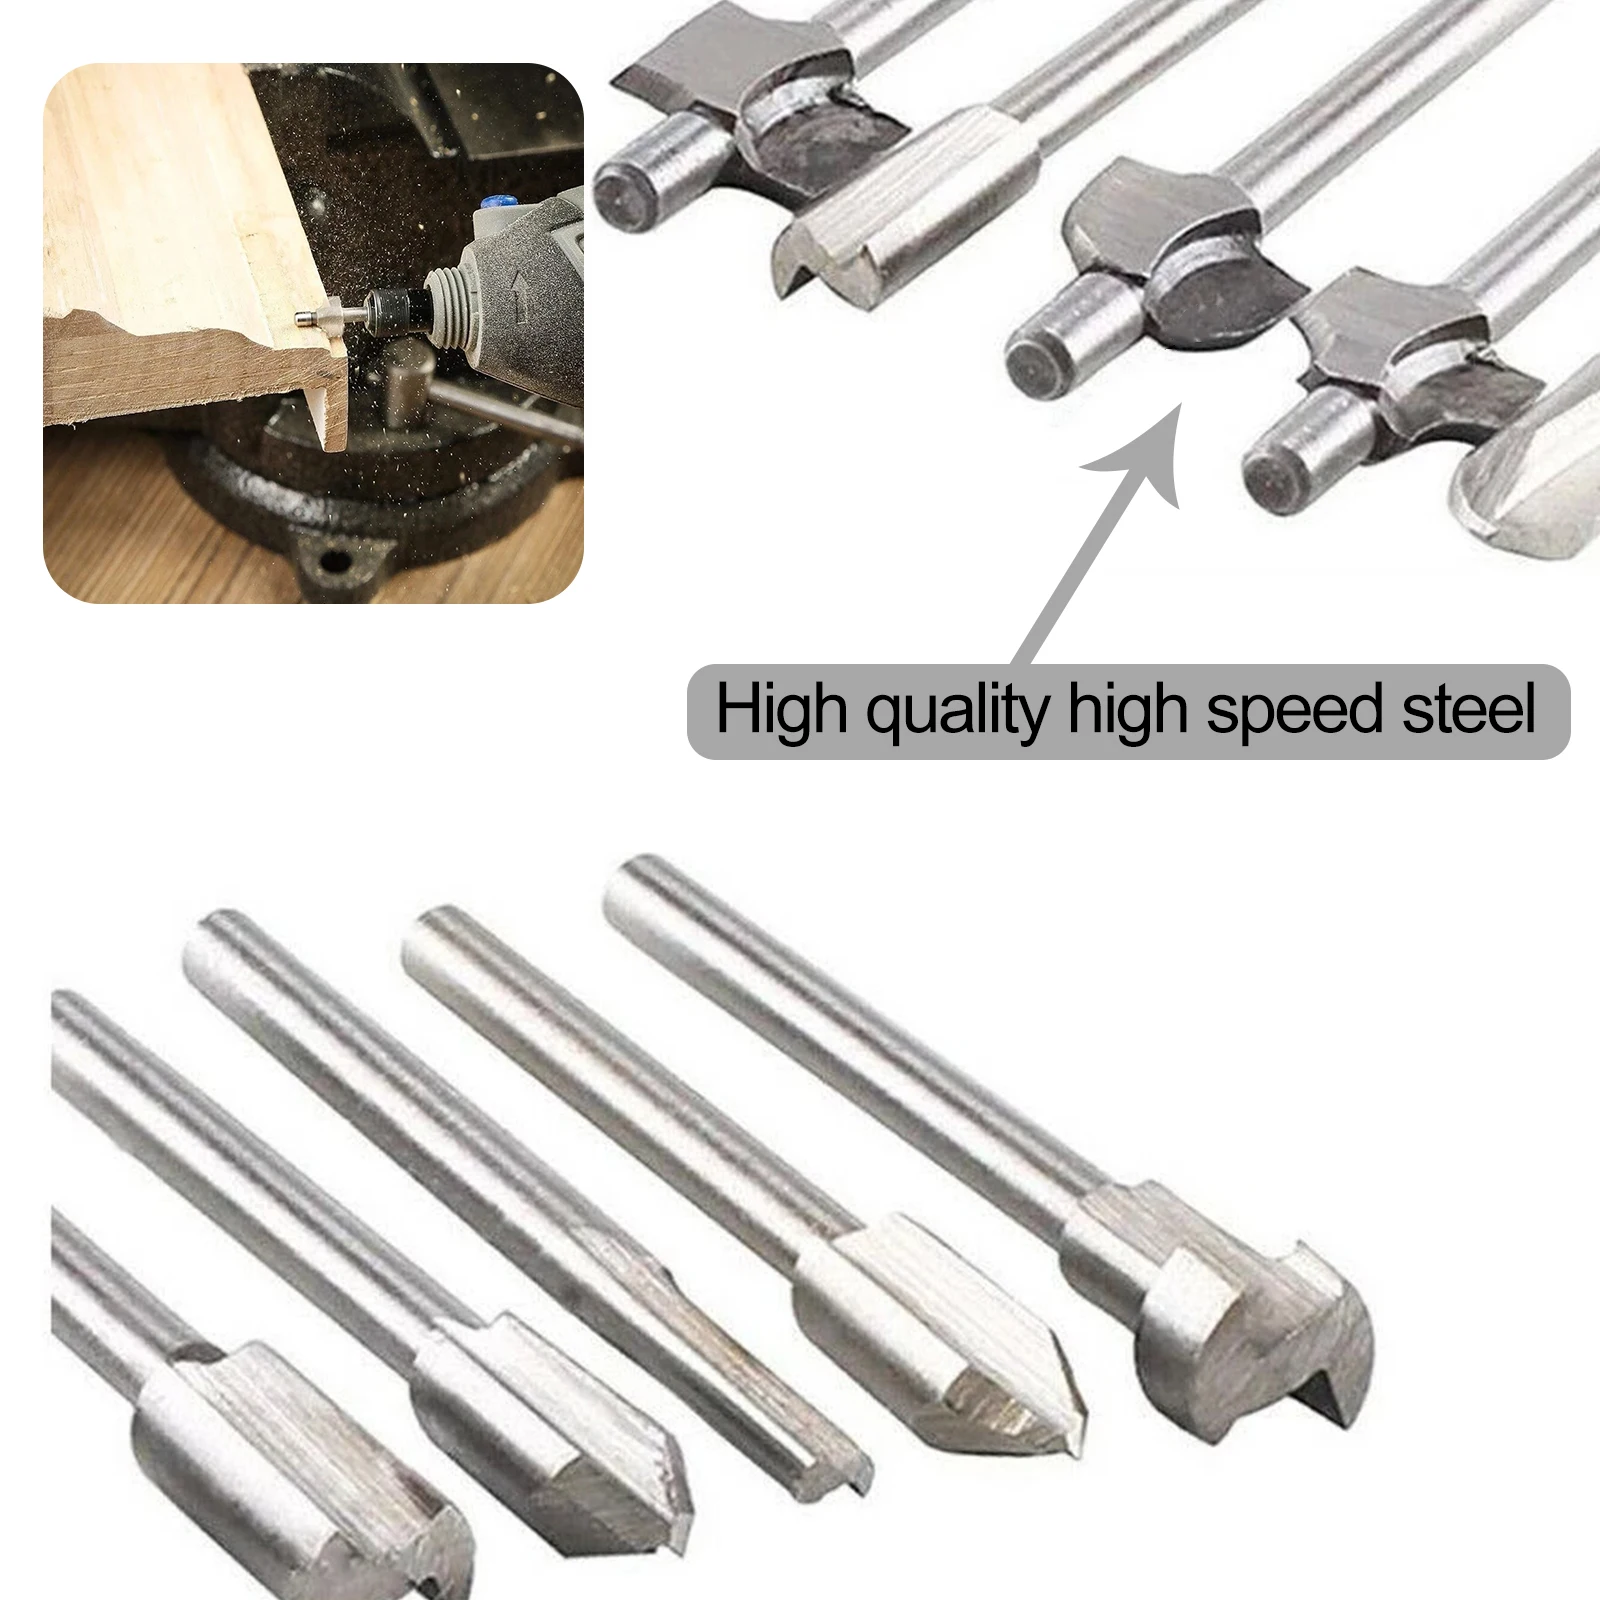 1pcs alloy steel tile porcelain drill bit hand tool for ceramic granite tiles stone wood plastic electric hammer percussion dril 10pcs 3.2mm Routing Router Drill Bits Set Wood Stone Metal Root Carving Milling Cutter For Dremel Rotary Tool